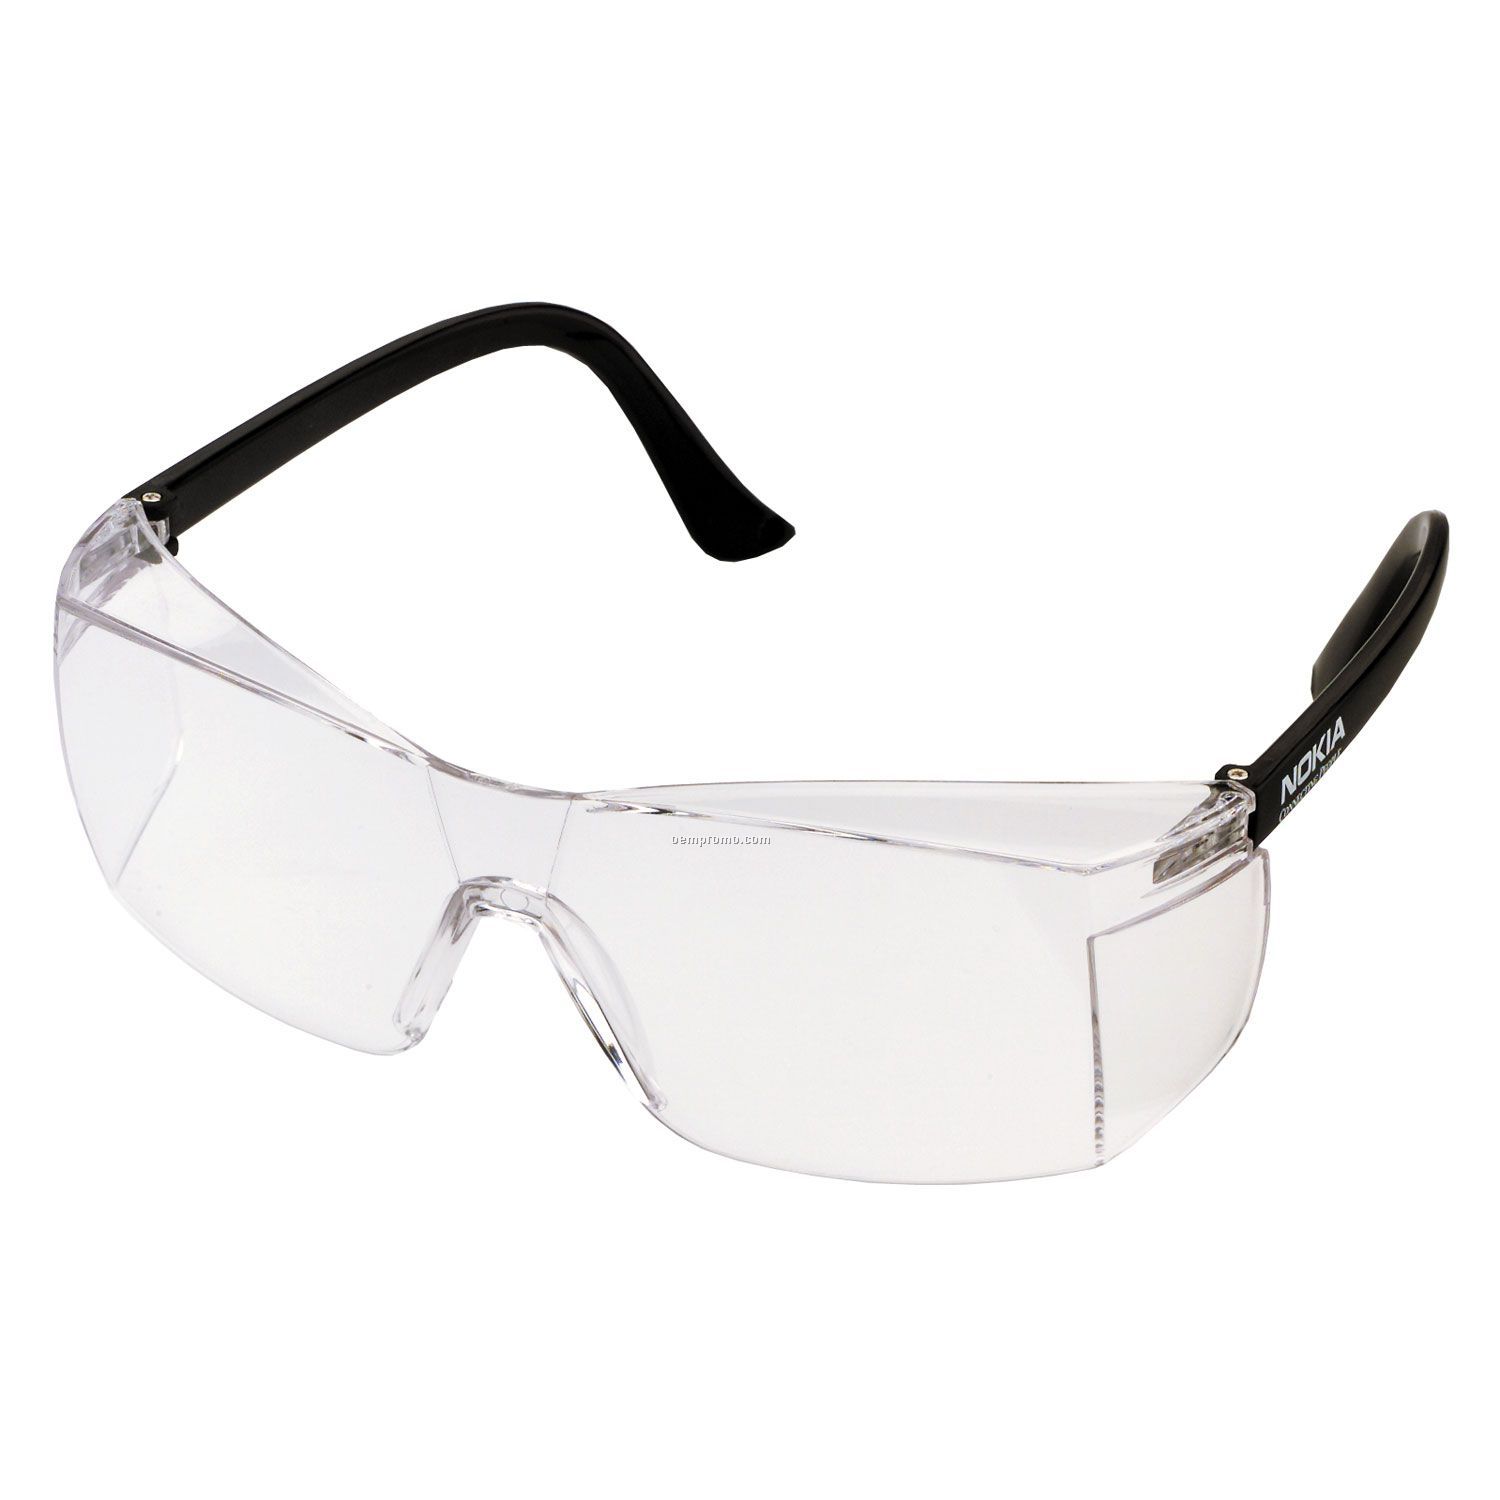 Chissel Black Temple Safety Glasses W/ Clear Lens